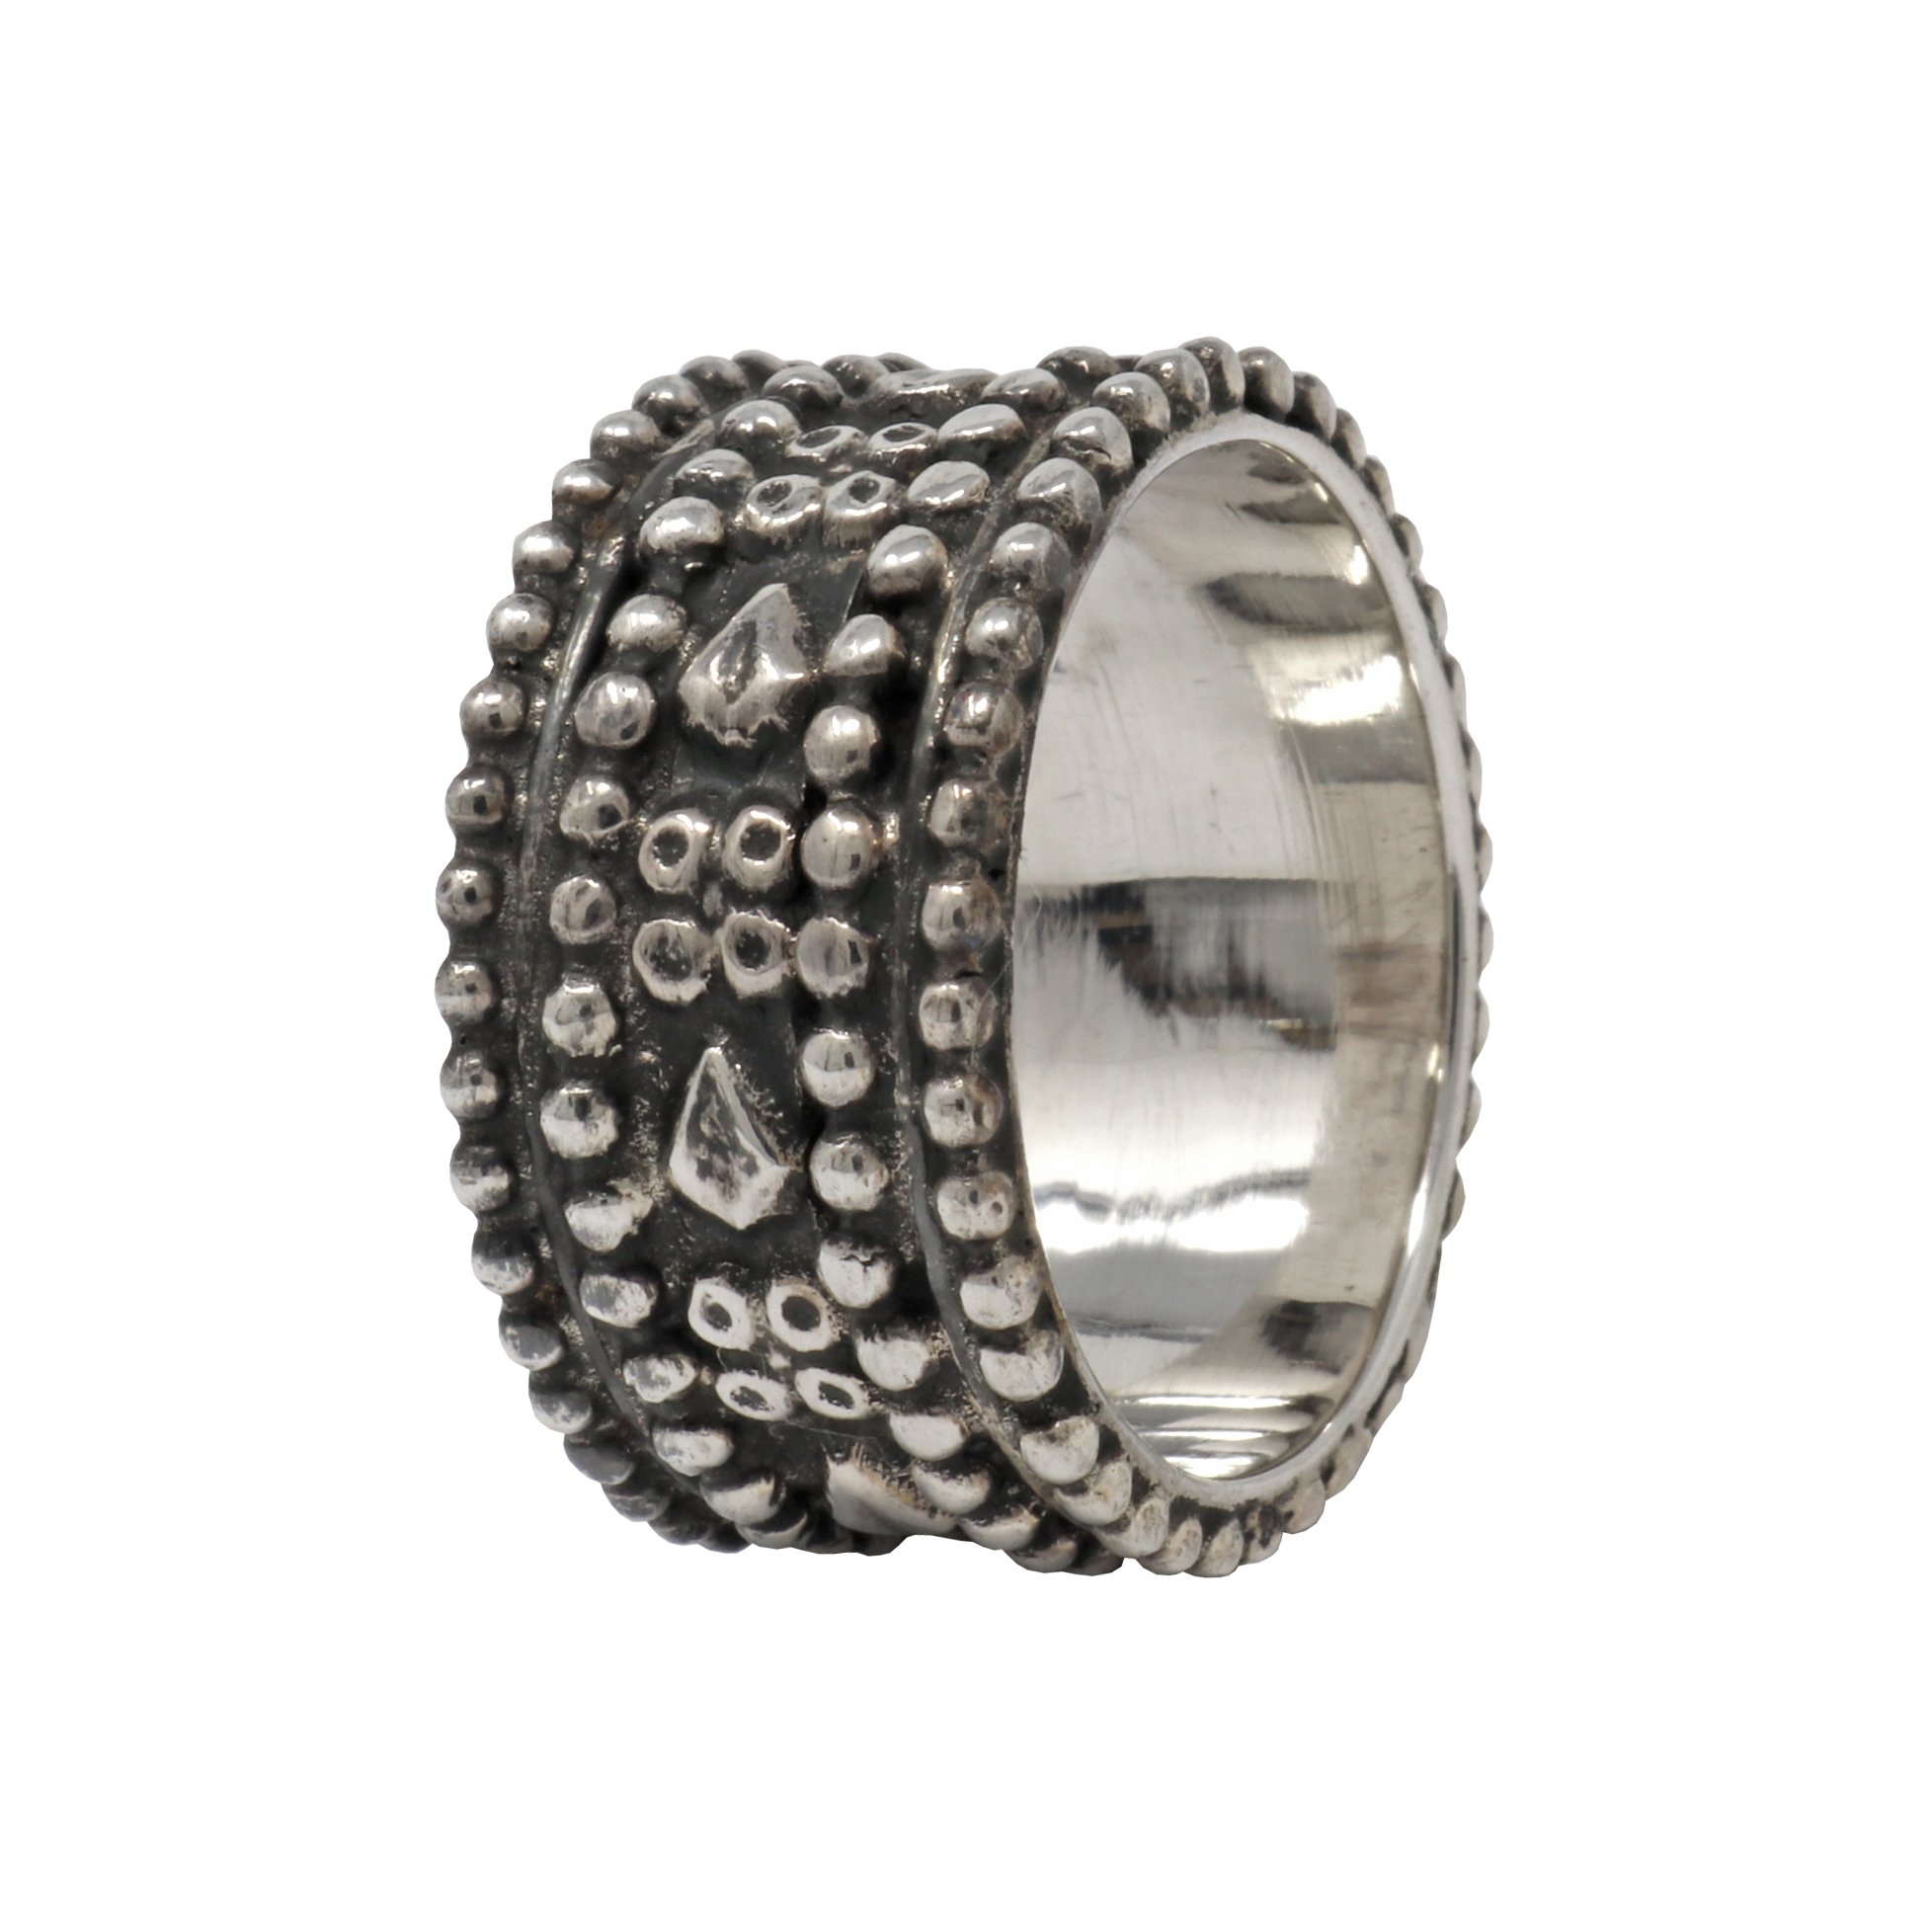 Silver Ring Size 9 Beads Around Ring- 9mm Wide